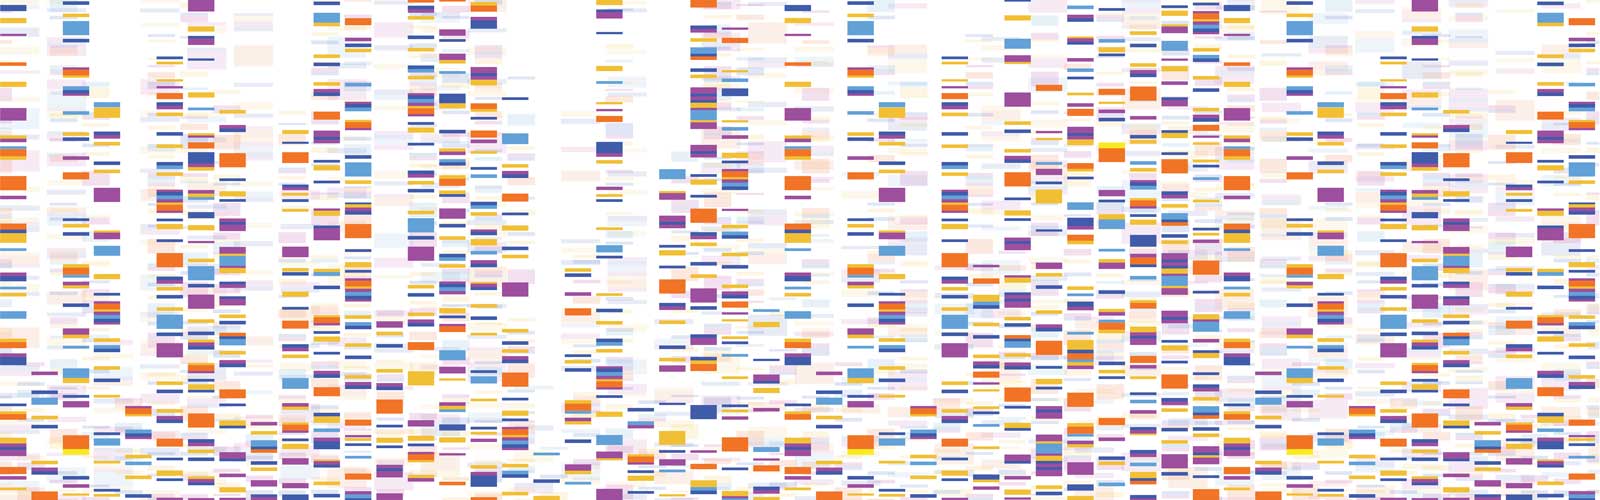 Dna test infographic. Vector illustration. Genome sequence map. 